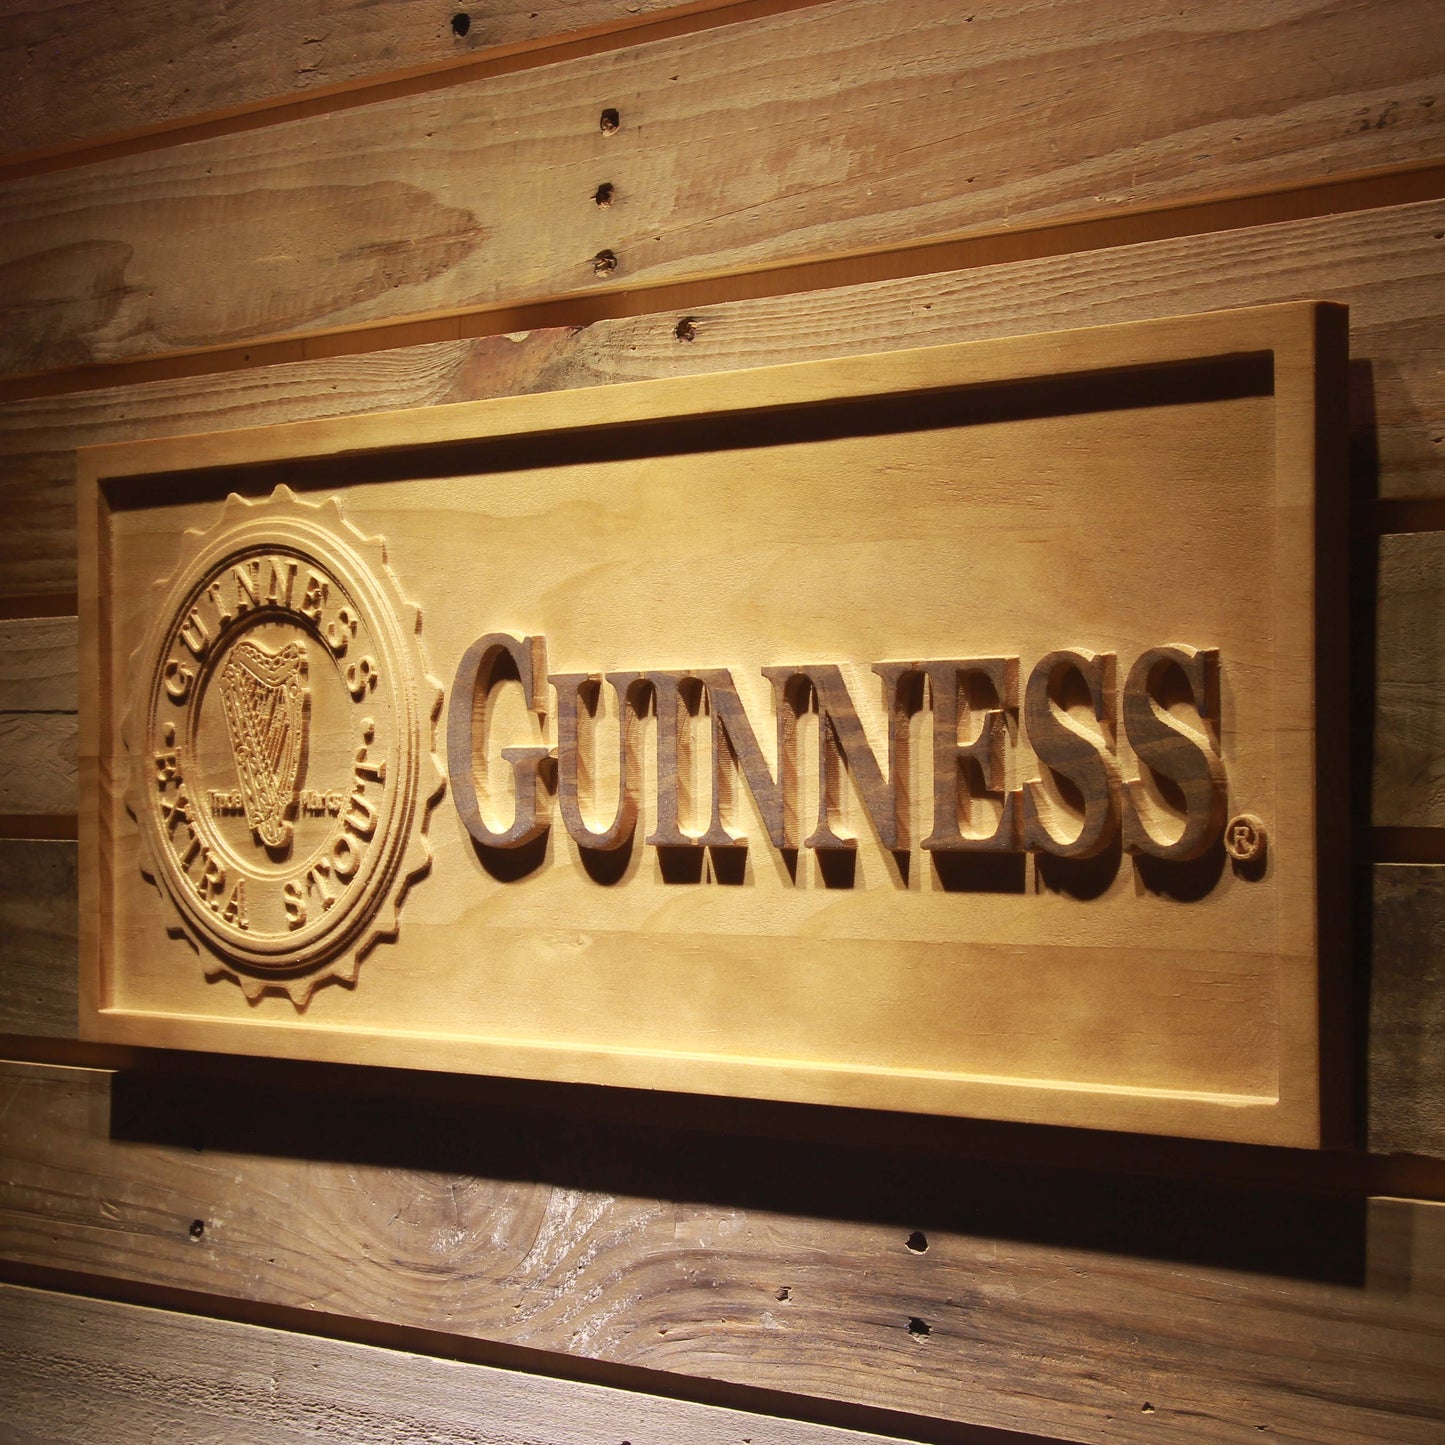 Guinness Extra Stout  3D Wooden Signs by Woody Signs Co. - Handmade Crafted Unique Wooden Creative